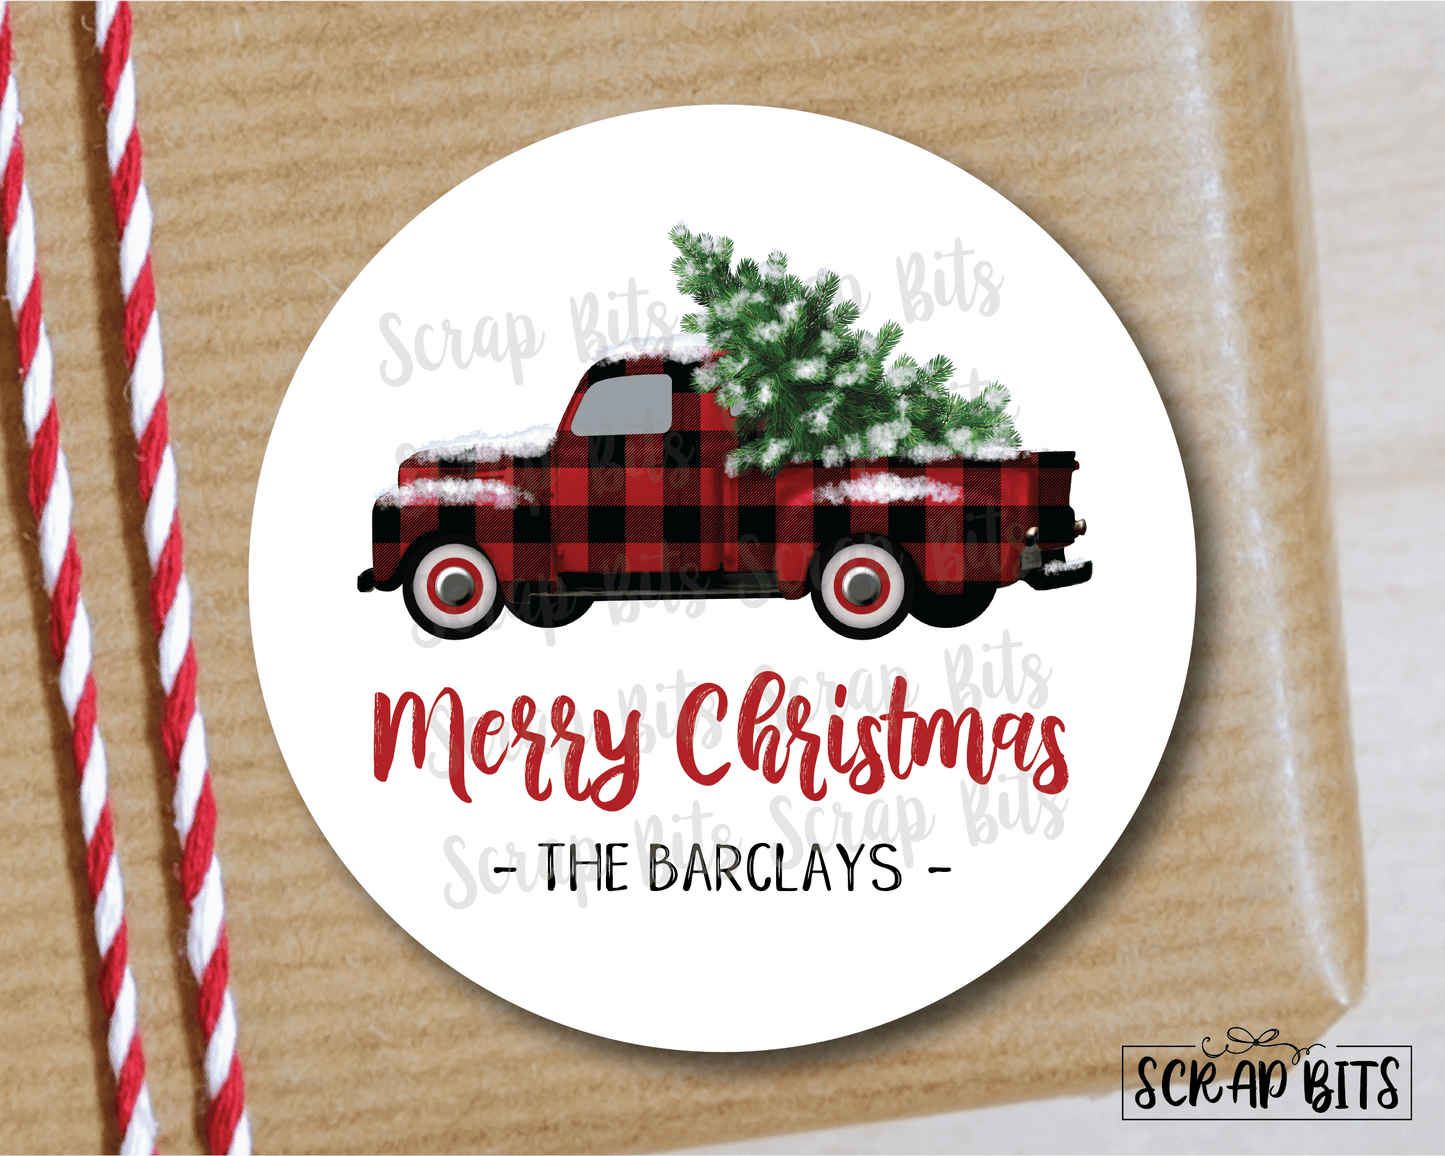 Buffalo Plaid Red Truck Stickers or Tags . Christmas Gift Labels - Scrap Bits